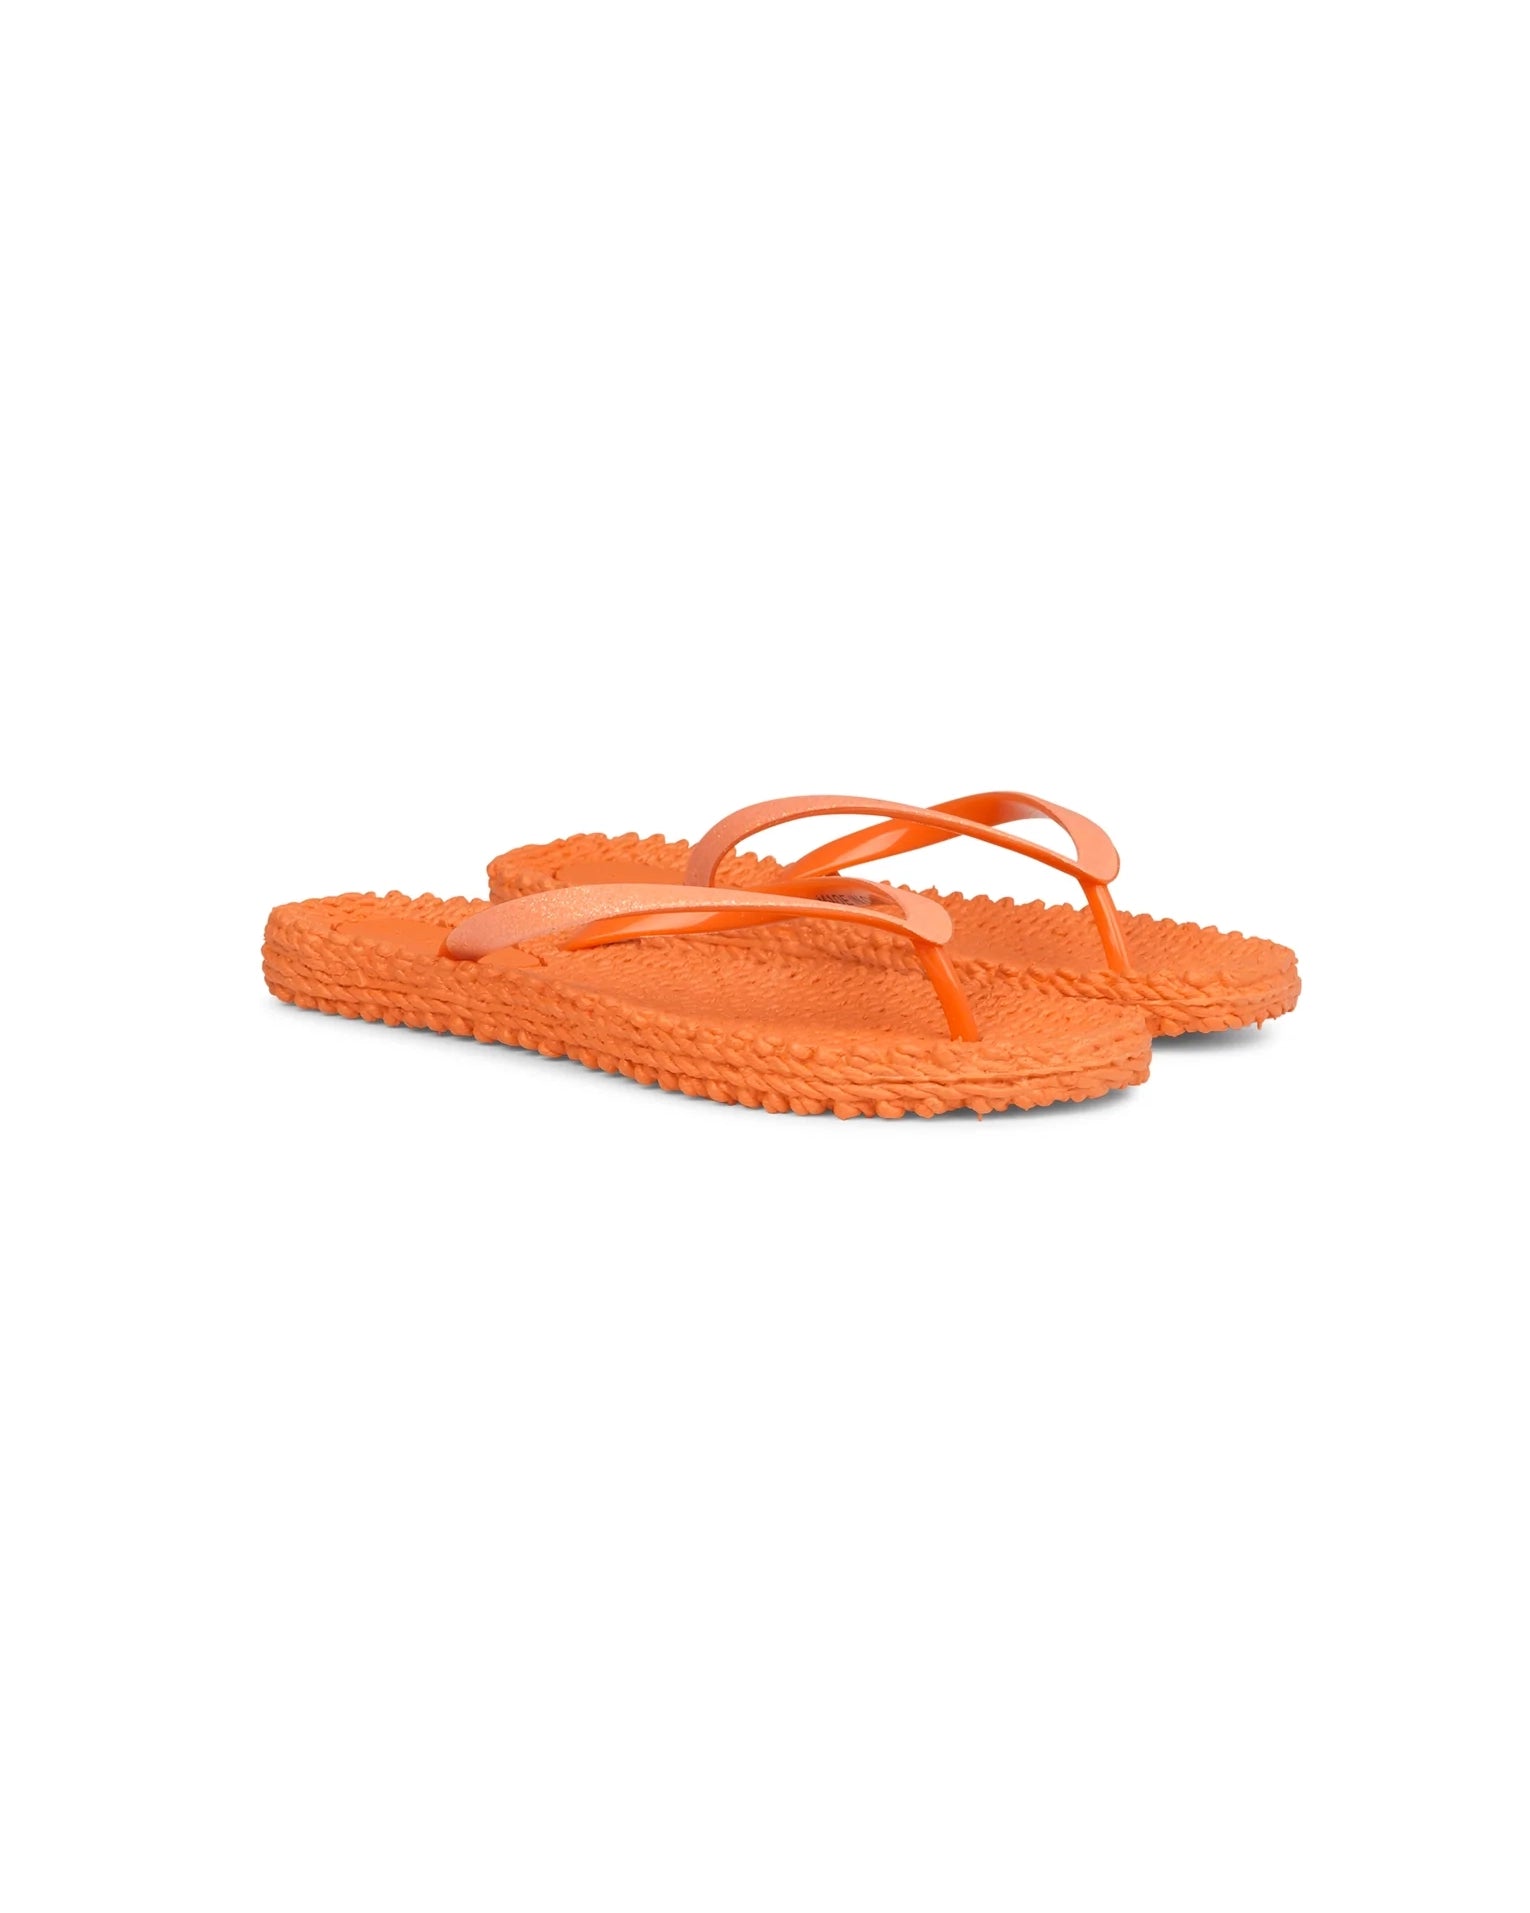 Ilse Jacobsen Cheerful Flip Flop with Glitter - Spice